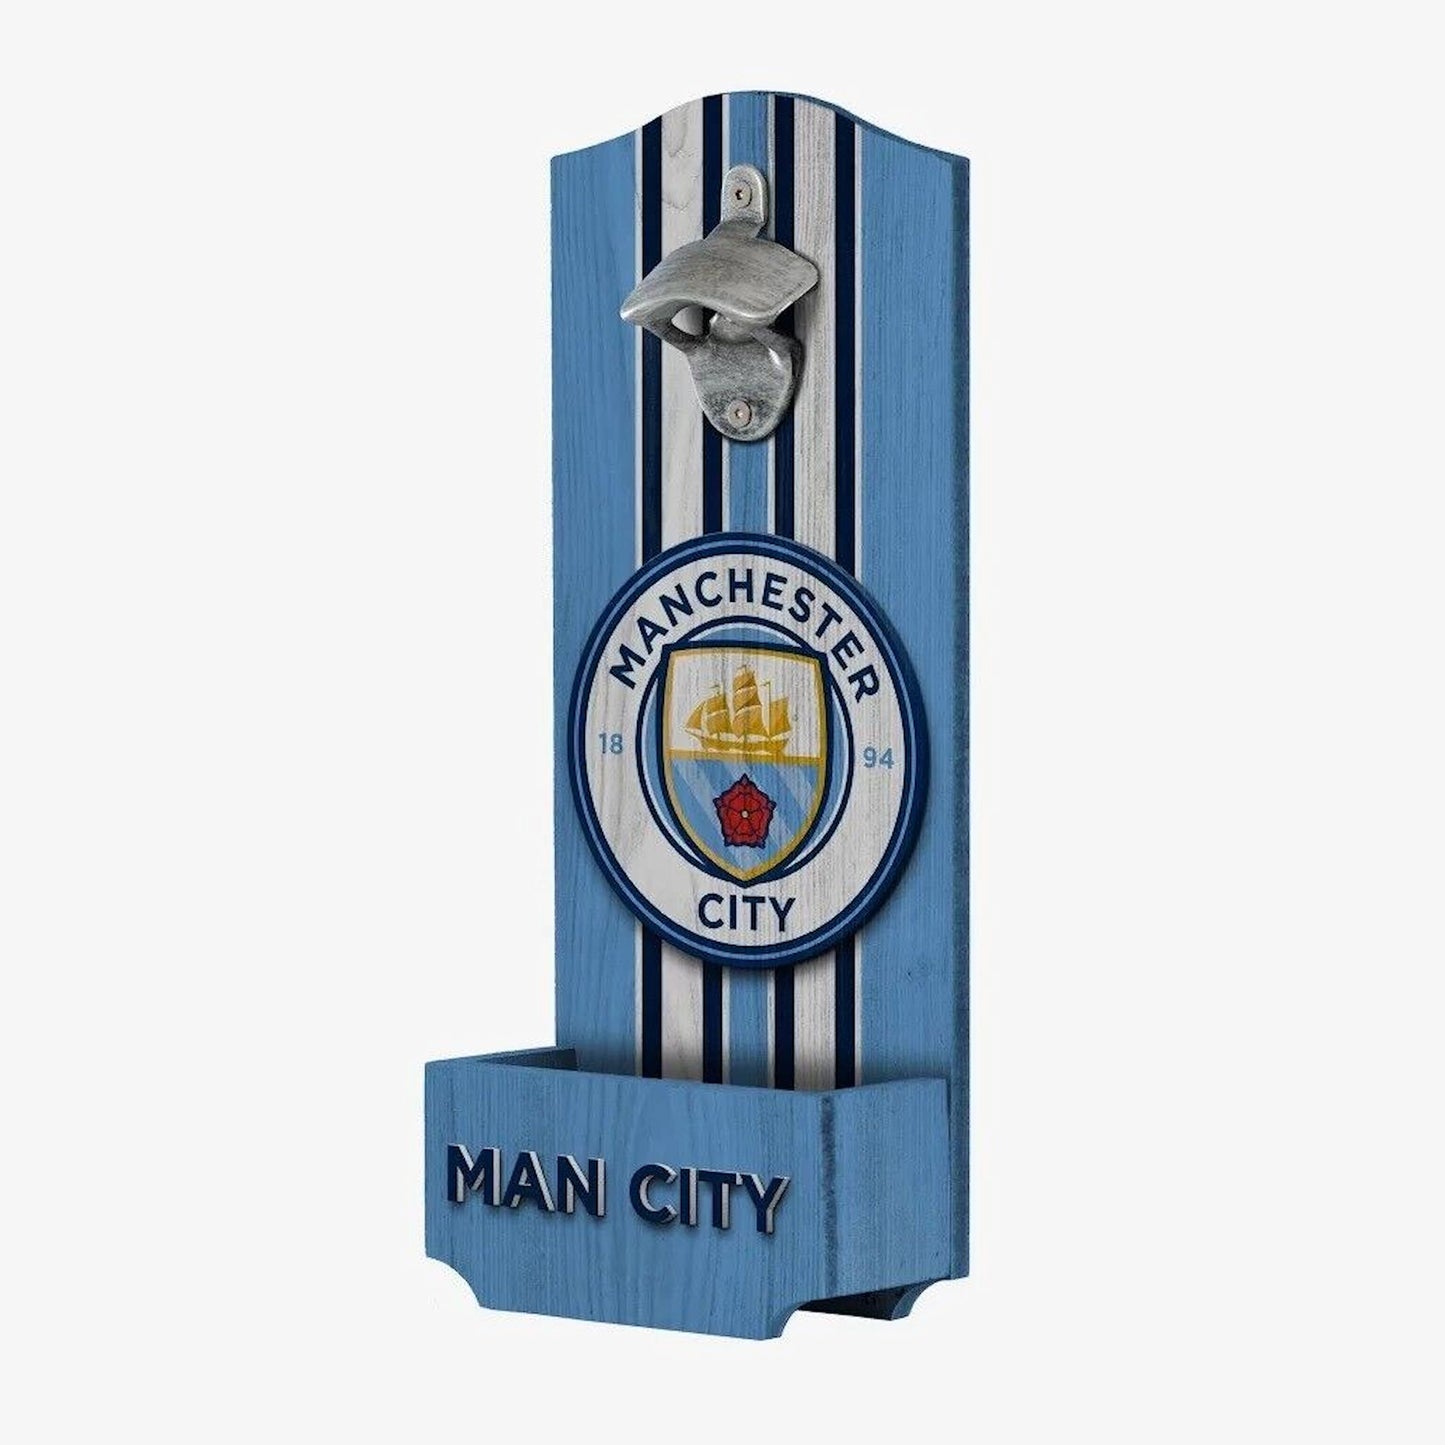 Manchester City Soccer Club Wooden Bottle Opener With Built-In Cap Catcher